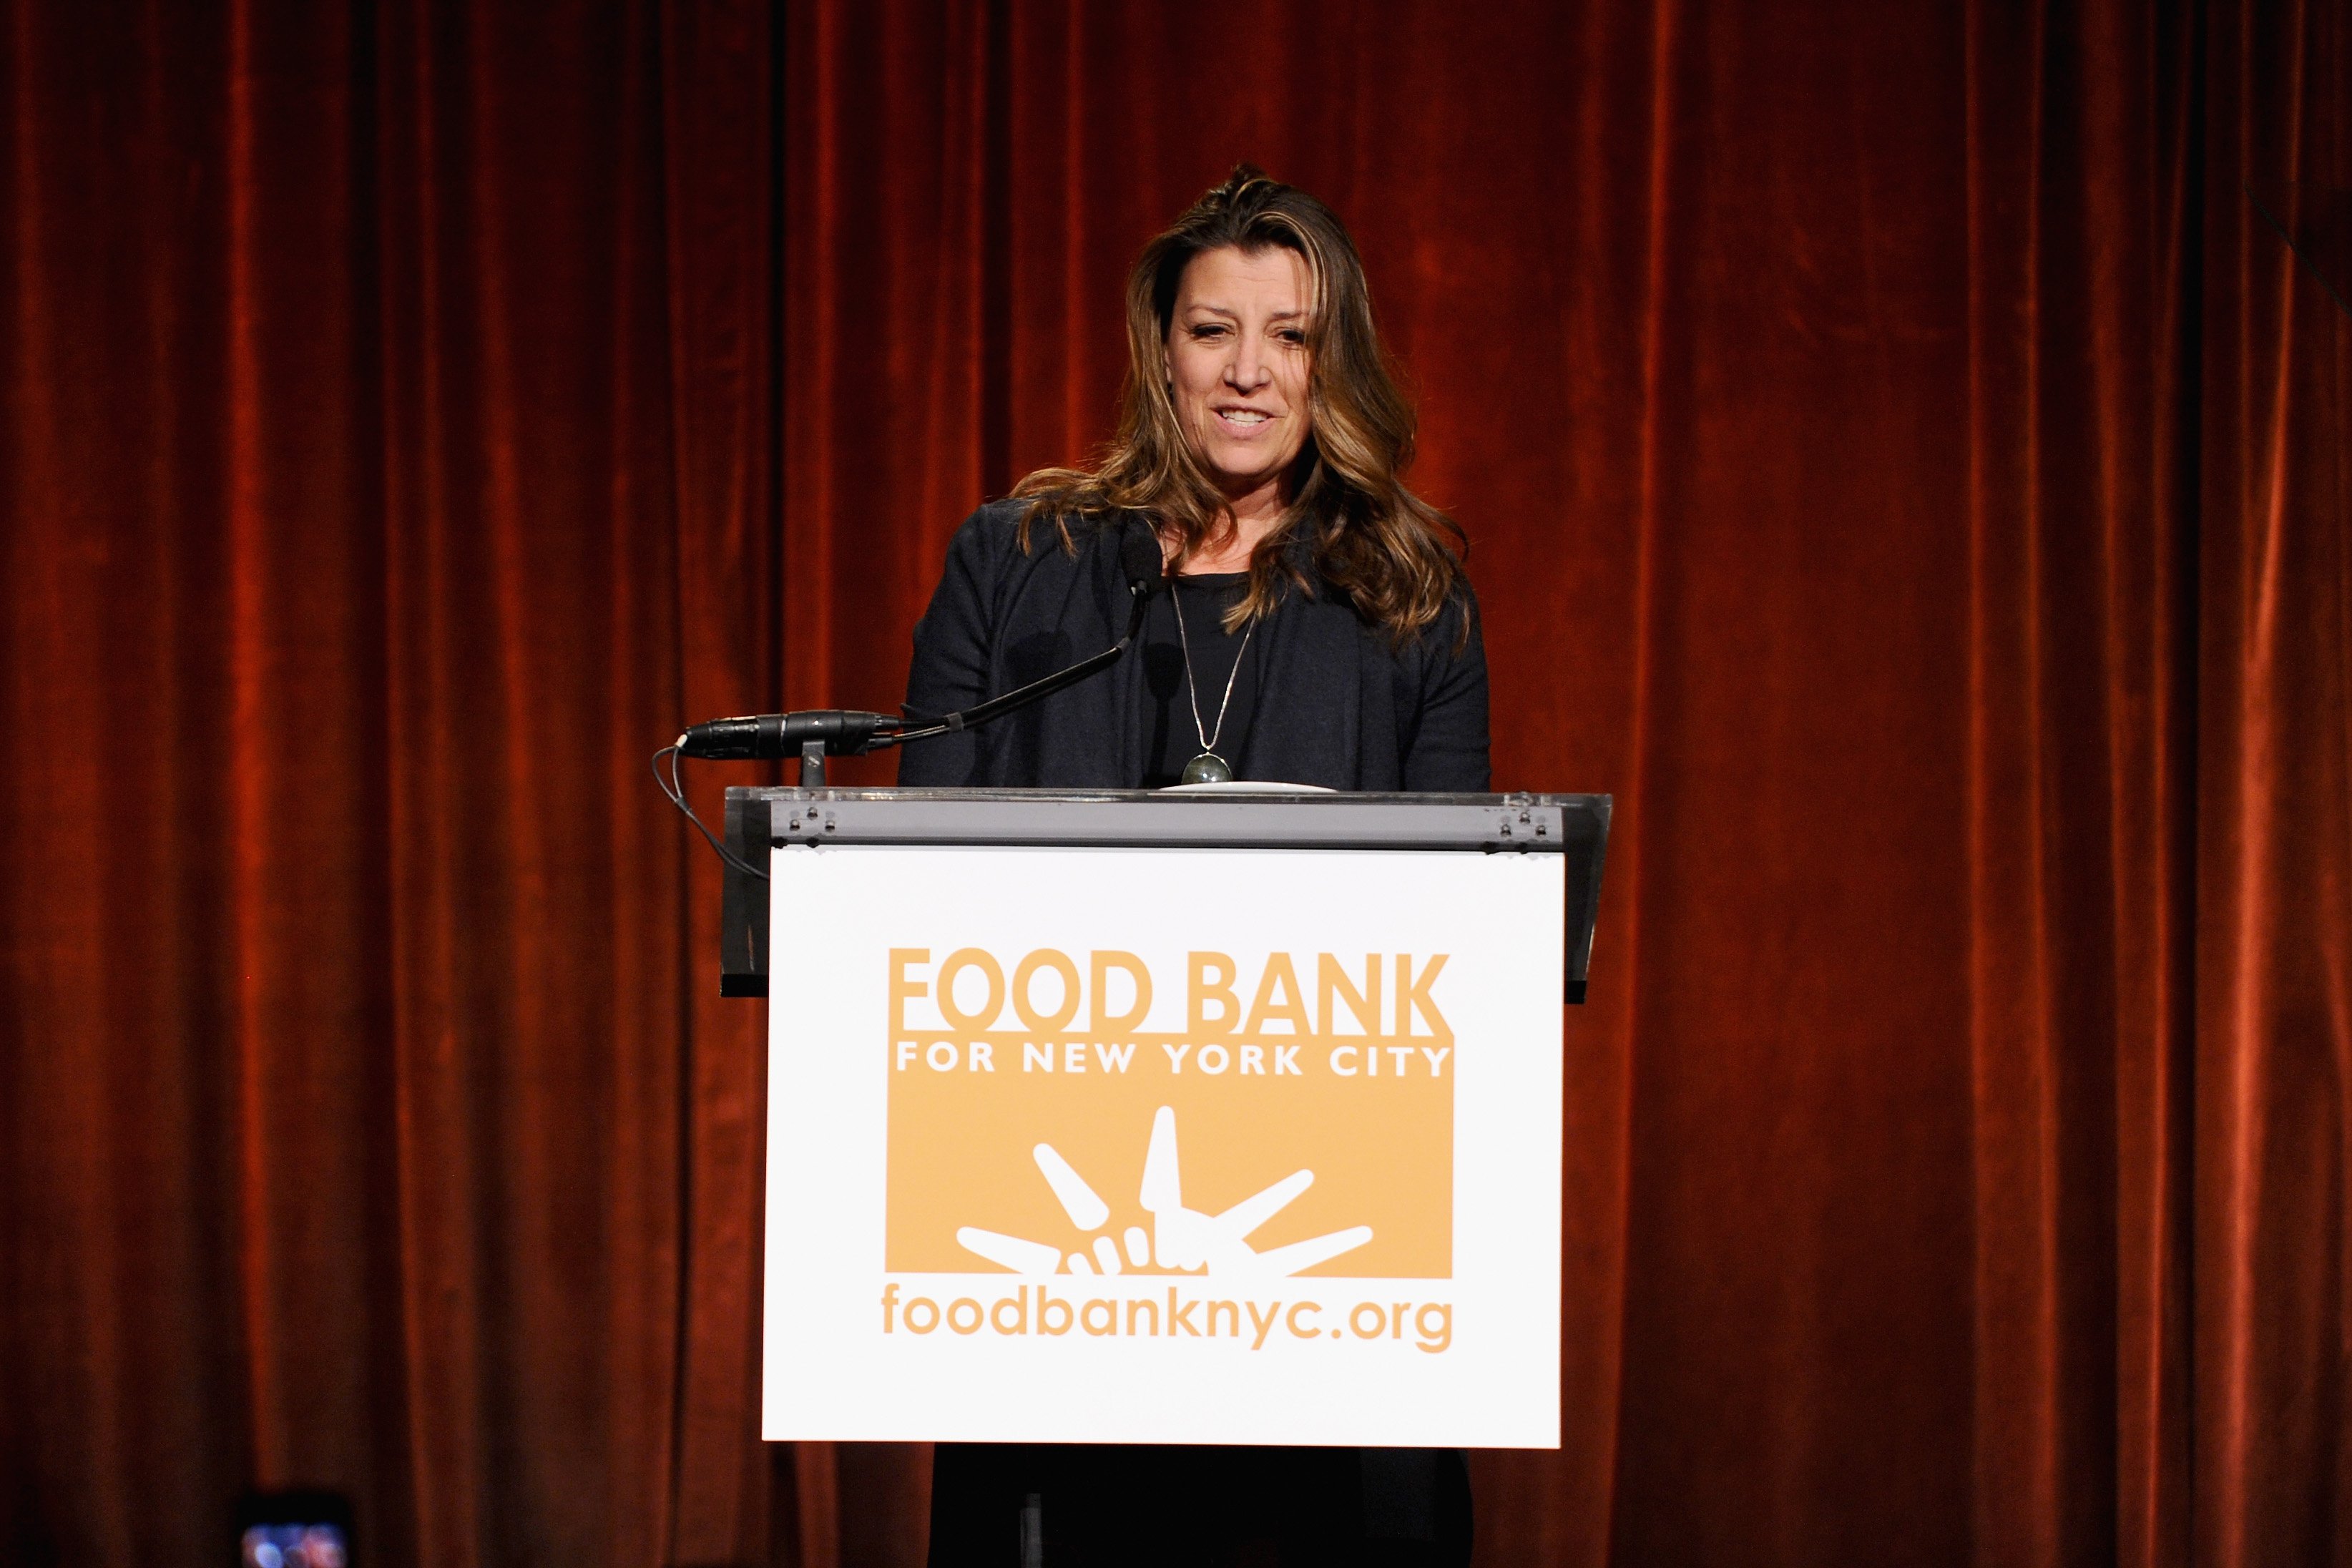 Dorothea Hurley is pictured speaking on stage at the Food Bank for New York City's Can Do awards dinner gala on April 9, 2014, in New York City | Source: Getty Images